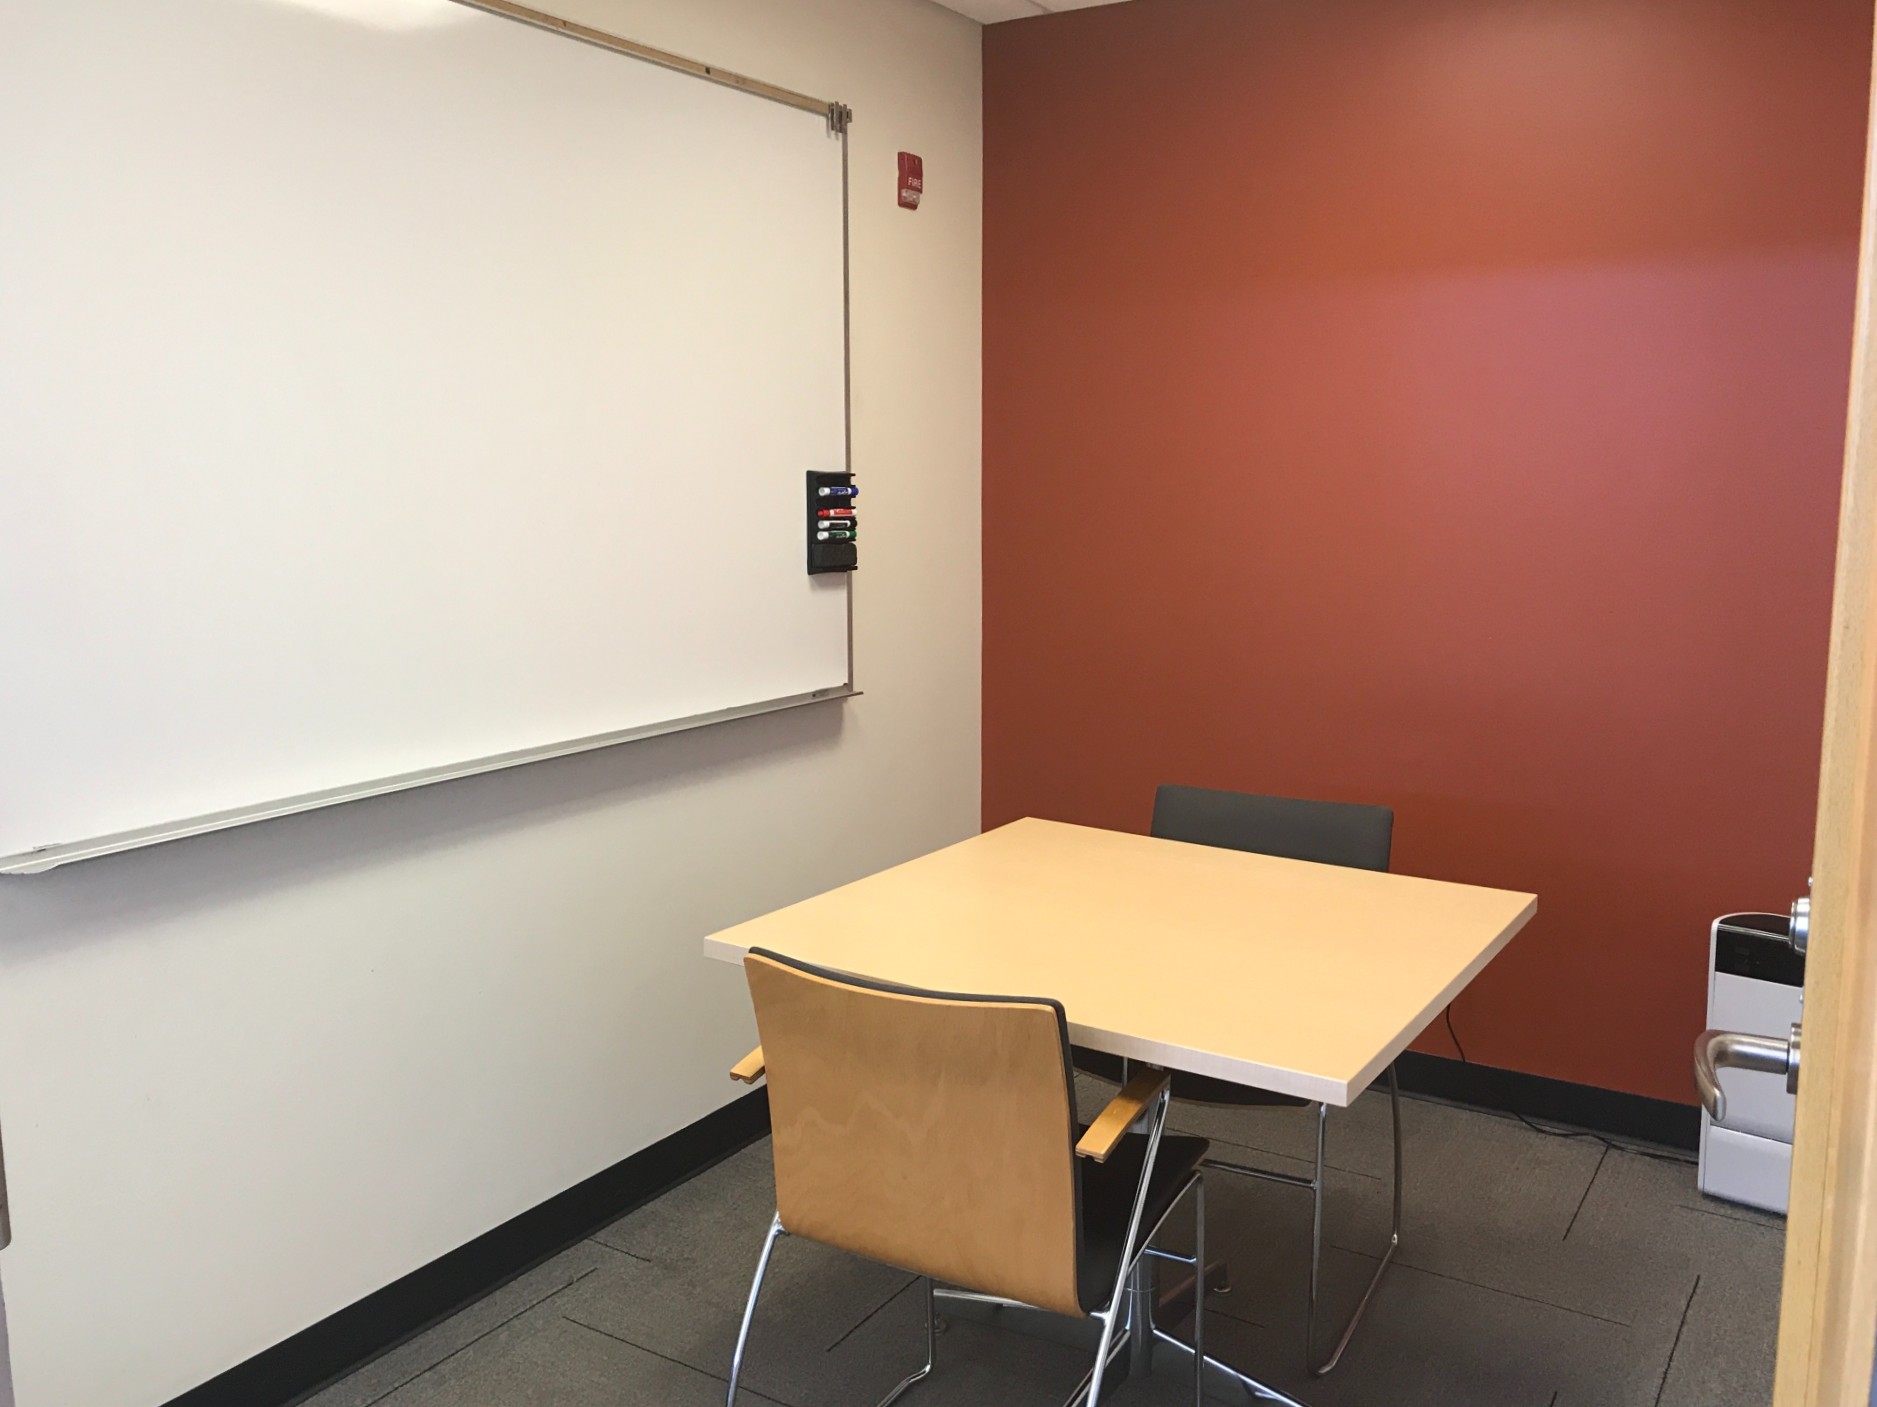 Image of study room with a whiteboard, two chairs and a desk.